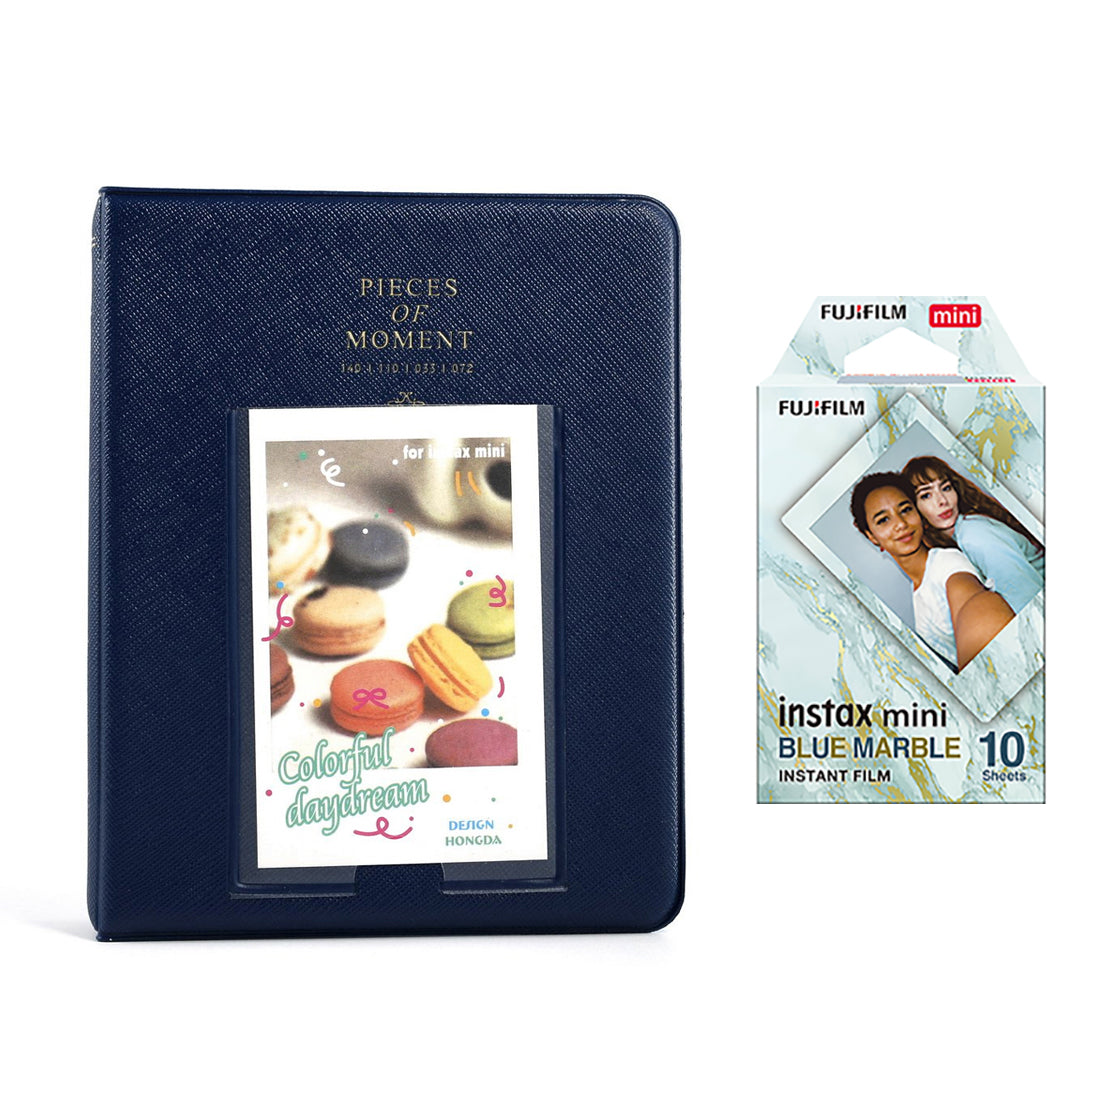 Fujifilm Instax Mini 10X1 blue marble Instant Film with Instax Time Photo Album 64 Sheets (Navy blue)